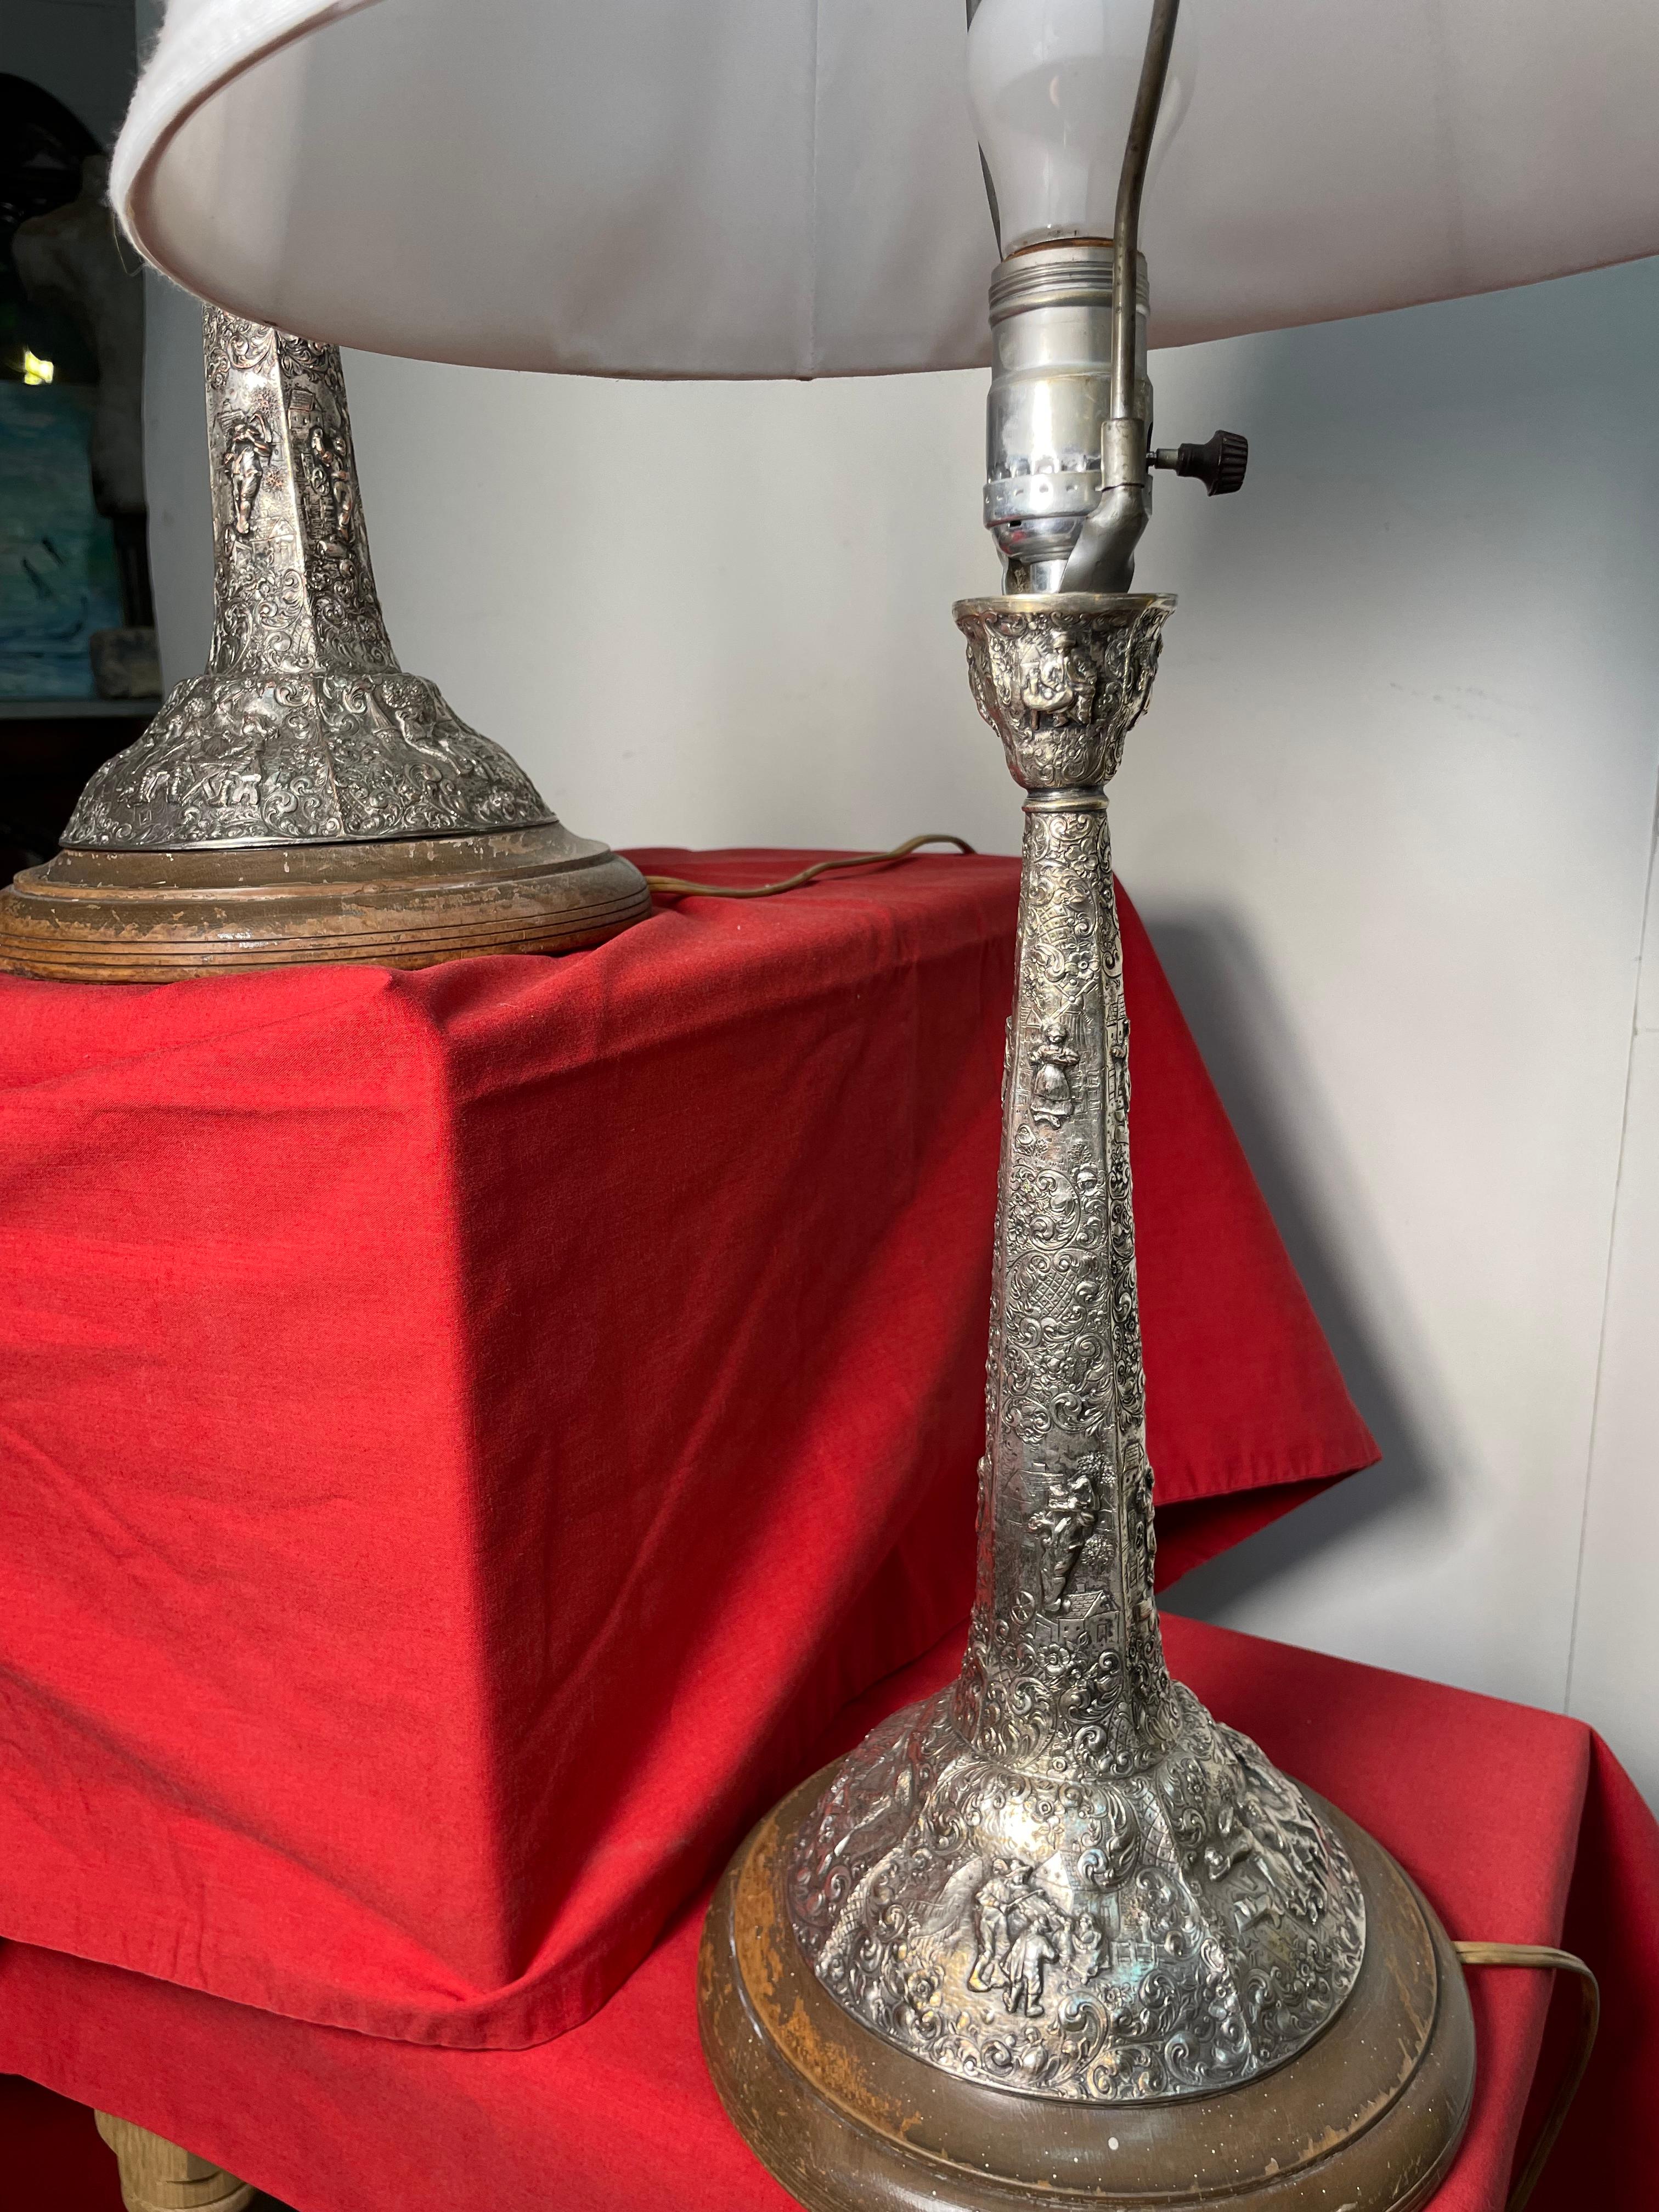 These solid silver lamps were hand hammered/carved creating an extremely detailed stand. Within the carvings you can see a depiction where there is a village and its people. The scene is set to be joyful, with the people playing music and dancing.